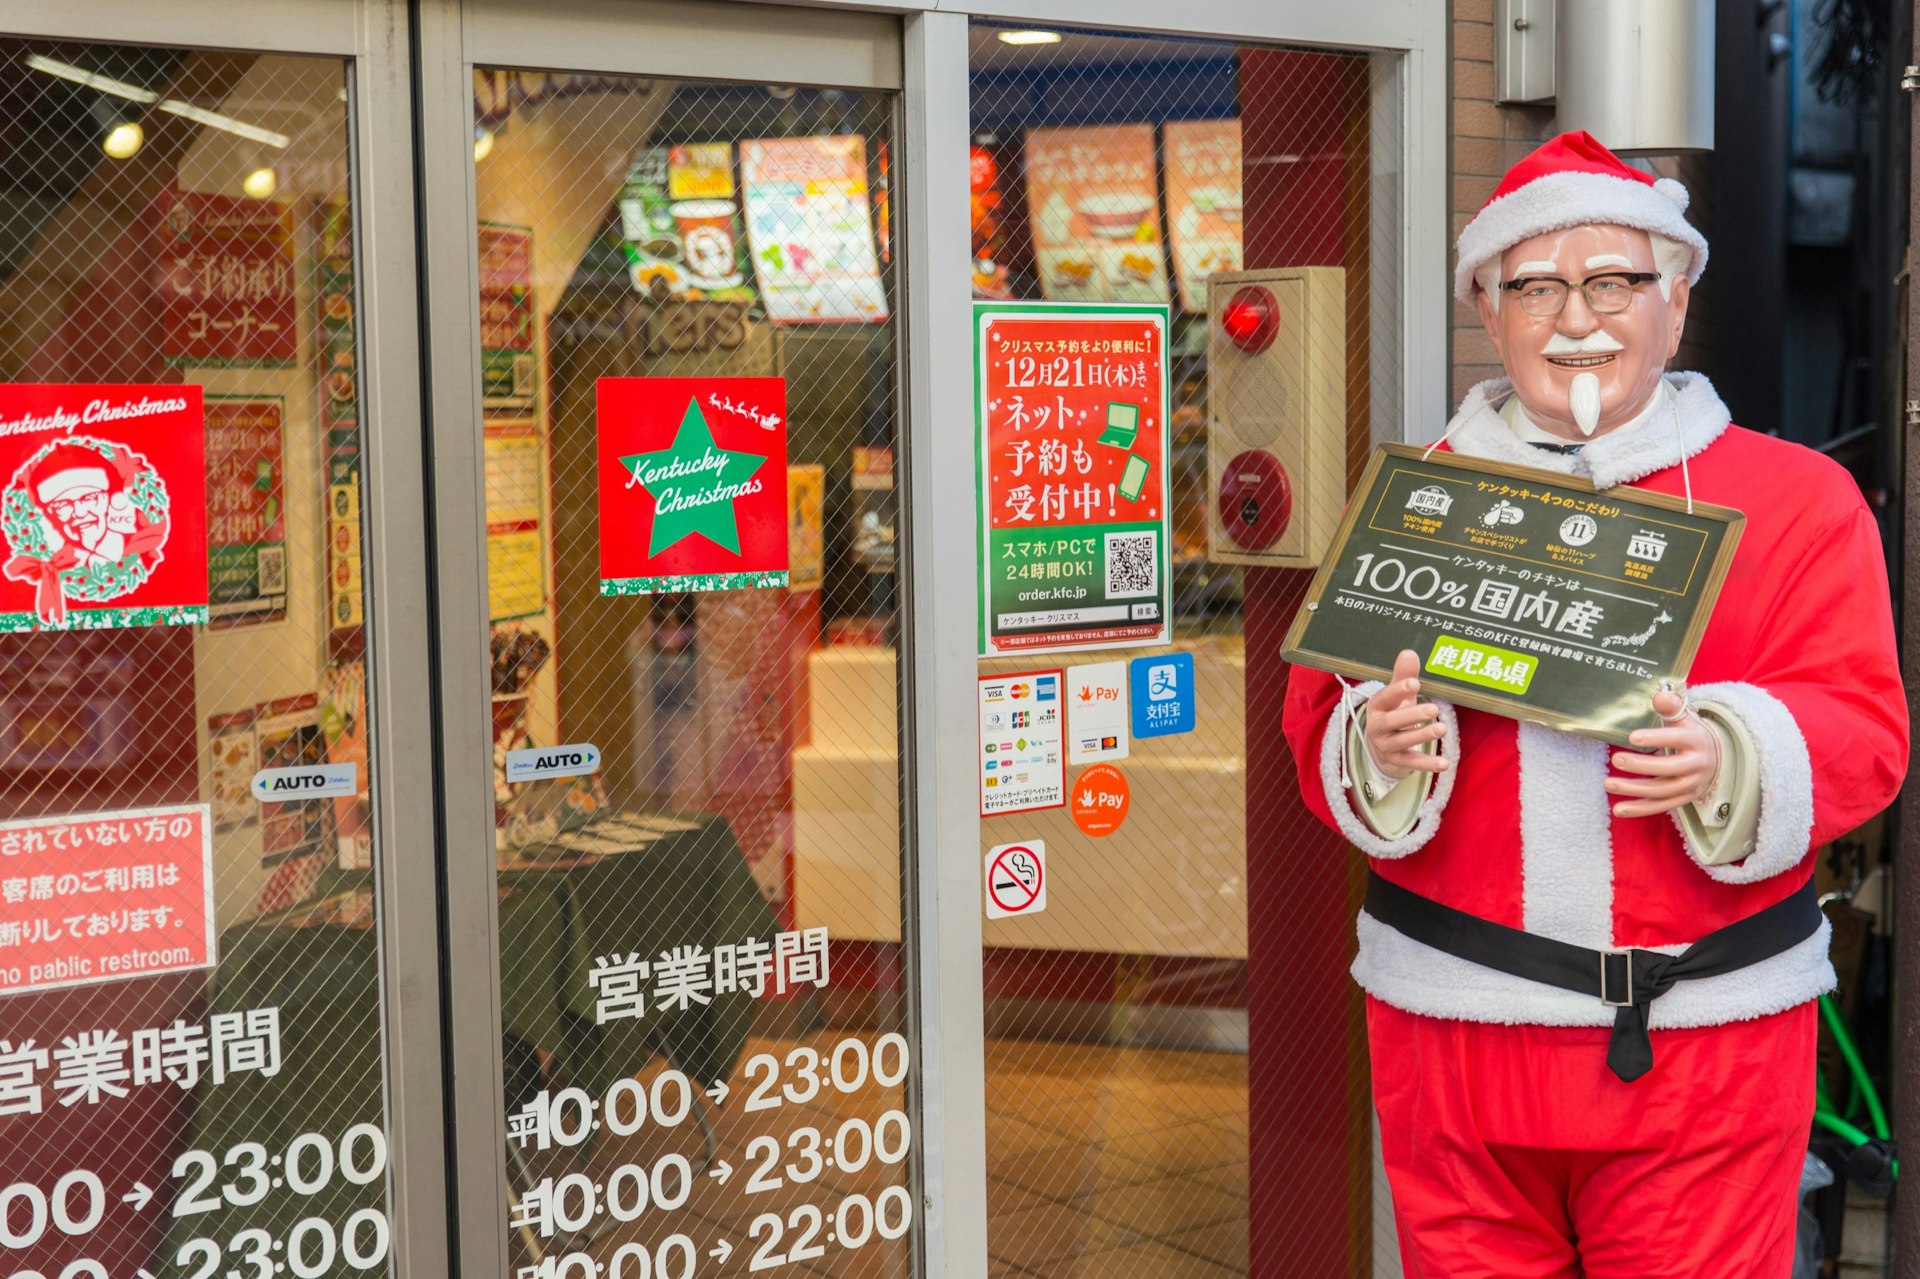 A statue of Kentucky Fried Chicken mascot Colonel Sanders sits outside a store front in Japan. 